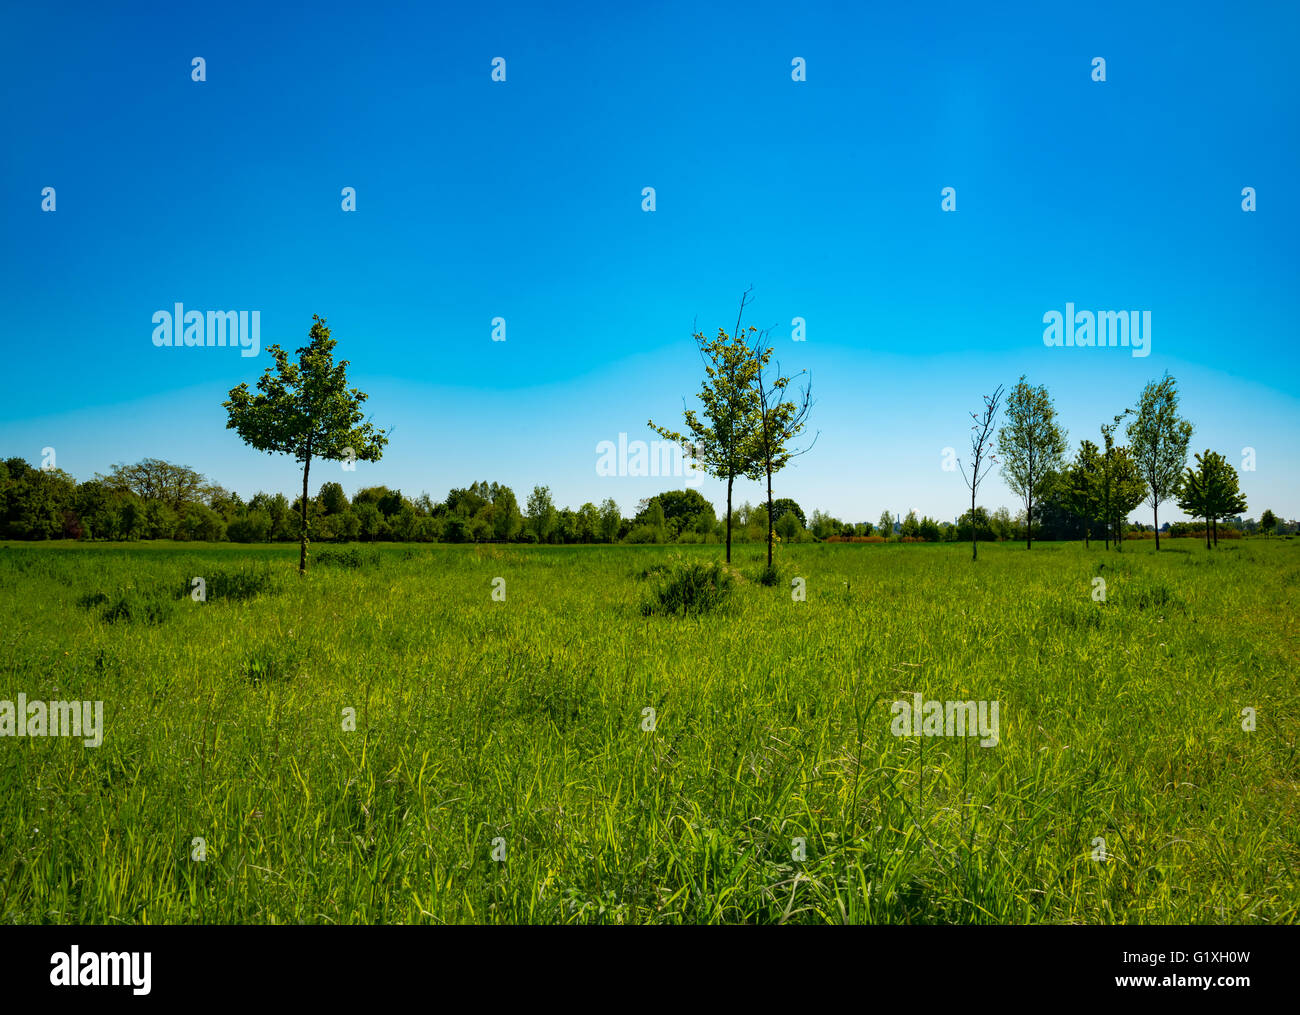 Green grass on meadow Banque D'Images